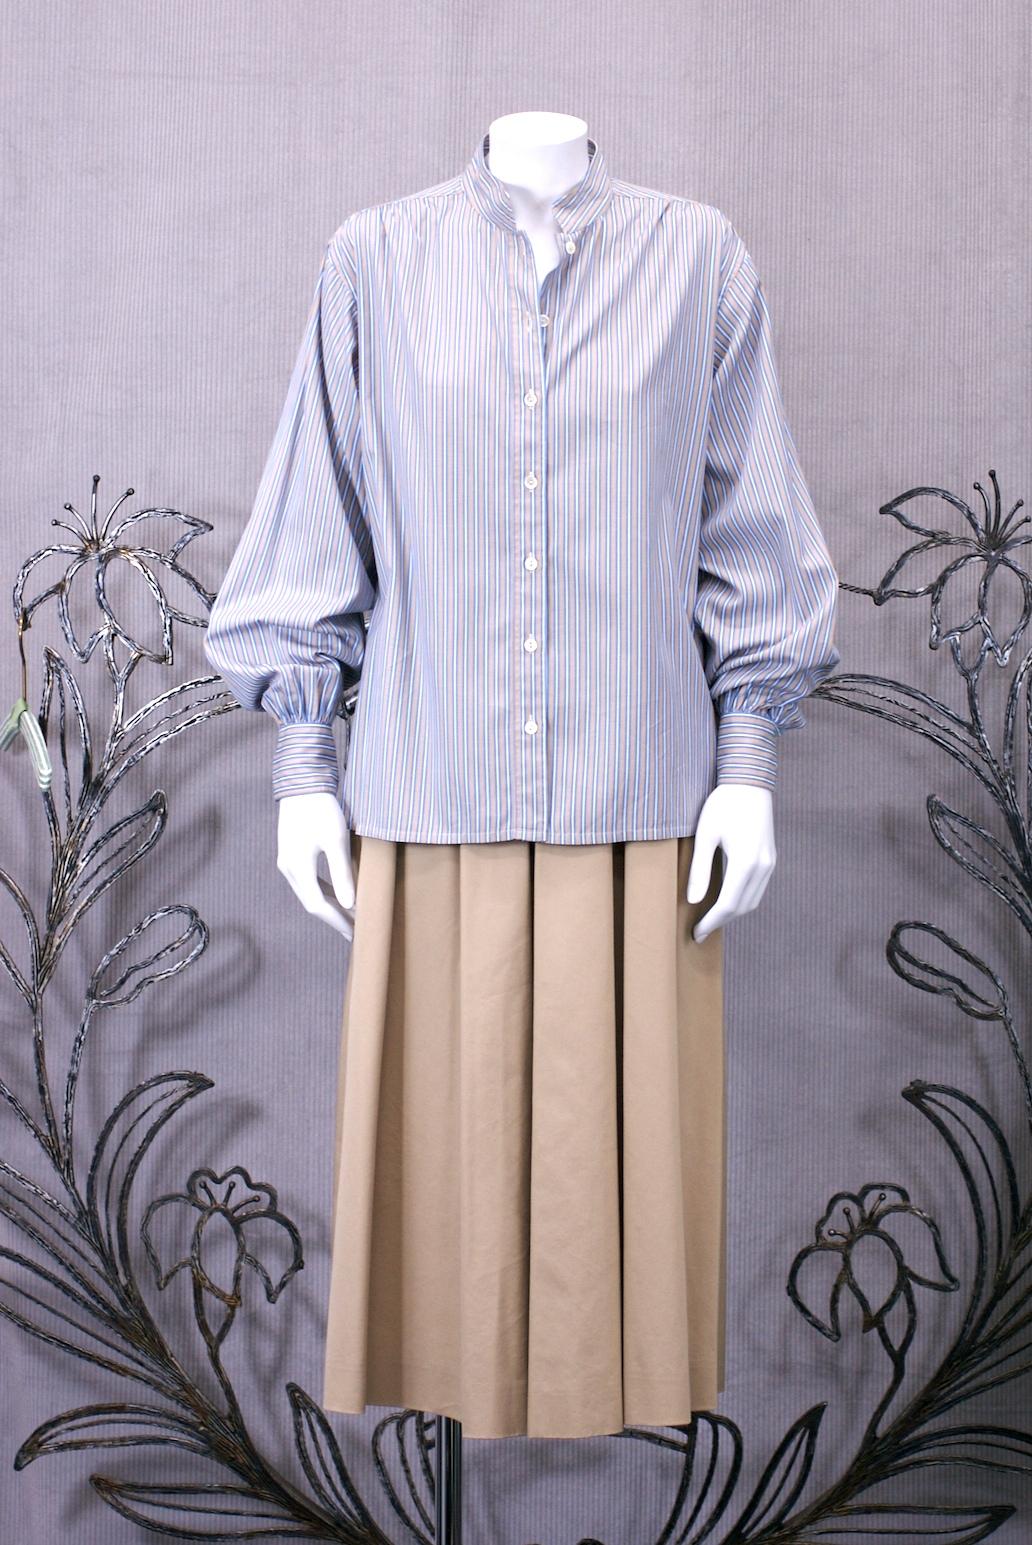 YSL Rive Gauche cotton blouse with band collar and button front entry. Cotton shirting of blue, beige and white stripes. Typical YSL styling of a classic form reinterpreted through a chic French lens. Unworn old stock. 
Nice full sleeves on a